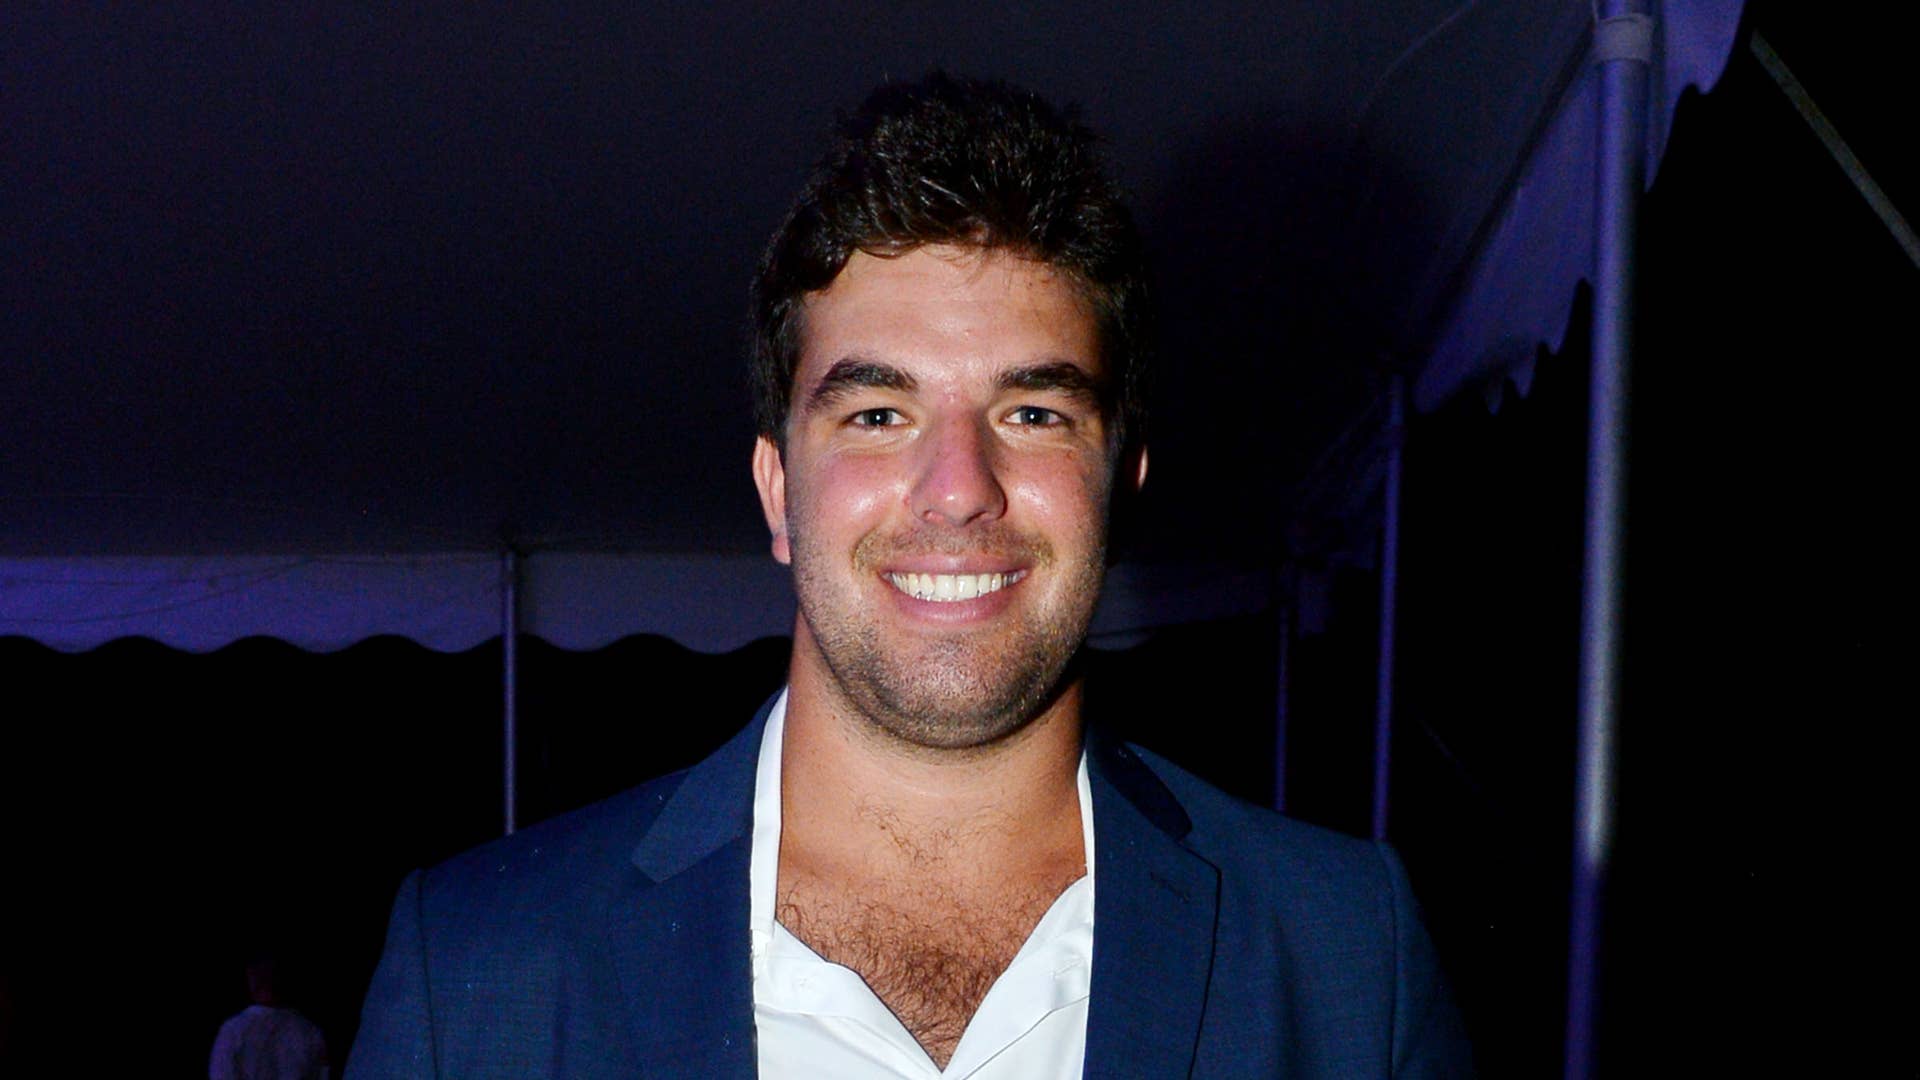 Billy McFarland attends The 23rd Annual Watermill Center Summer Benefit & Auction a